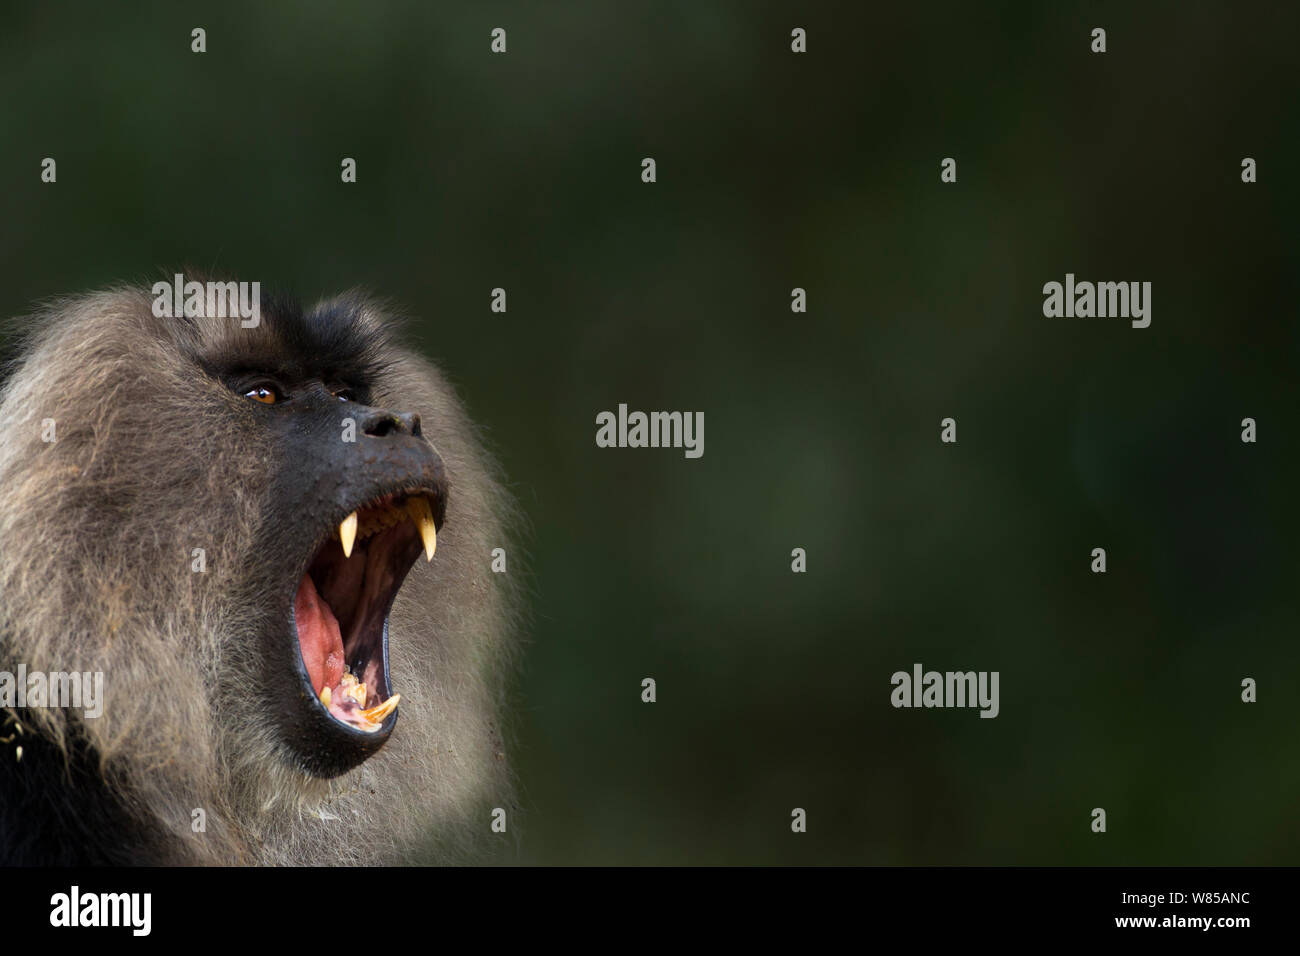 Lion-tailed macaque (Macaca silenus) male yawning. Anamalai Tiger Reserve, Western Ghats, Tamil Nadu, India. Stock Photo